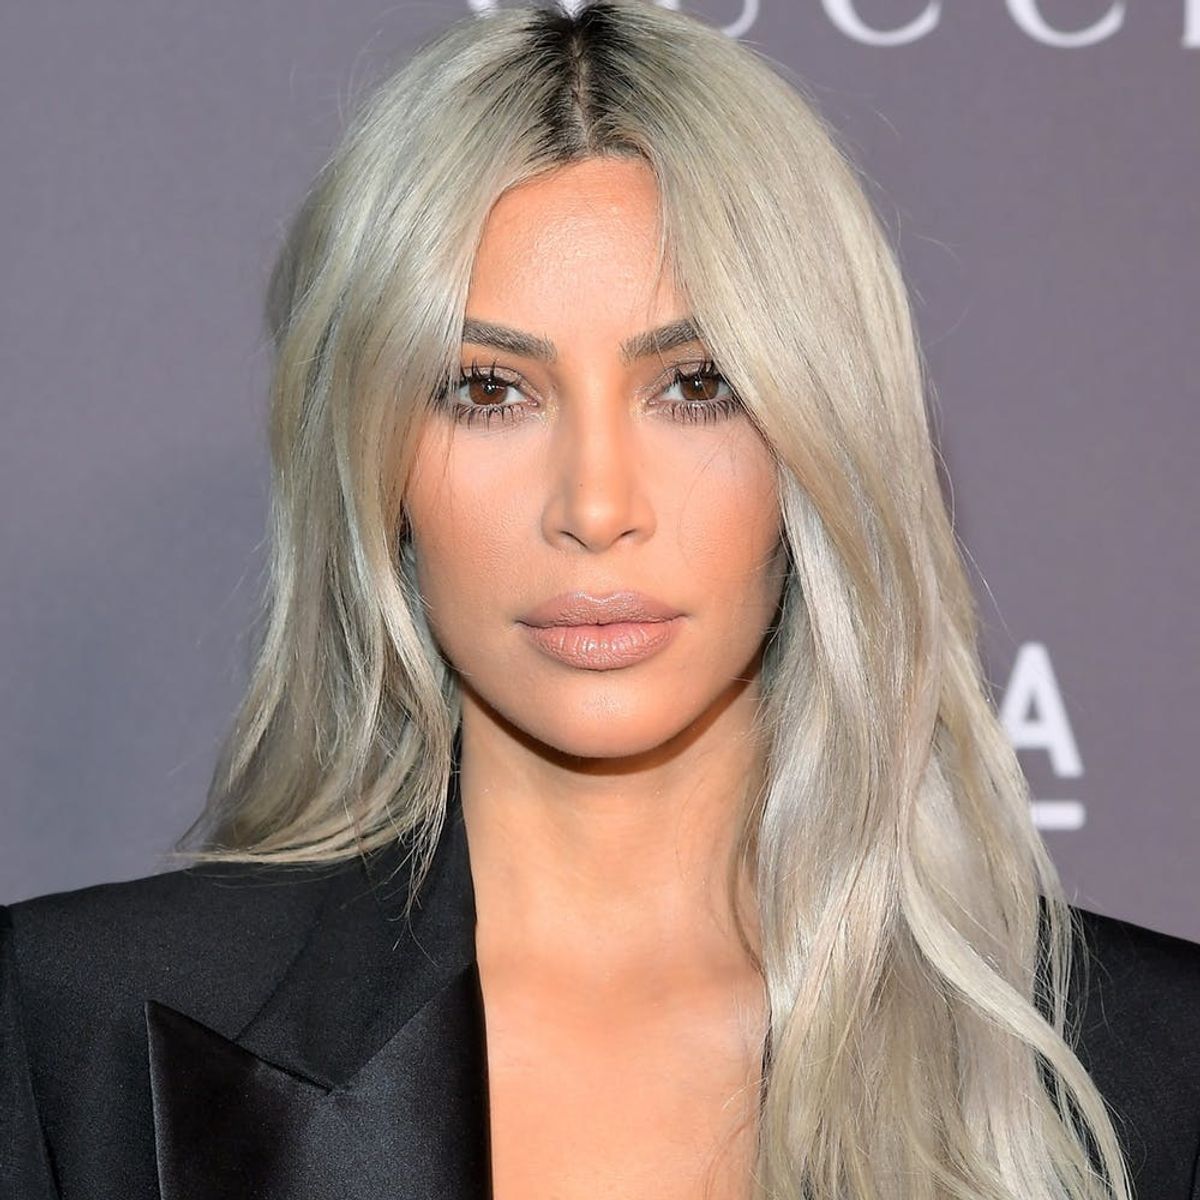 Kim Kardashian West “Anorexia” Controversy Highlights the Star’s Complicated Relationship with Body Positivity